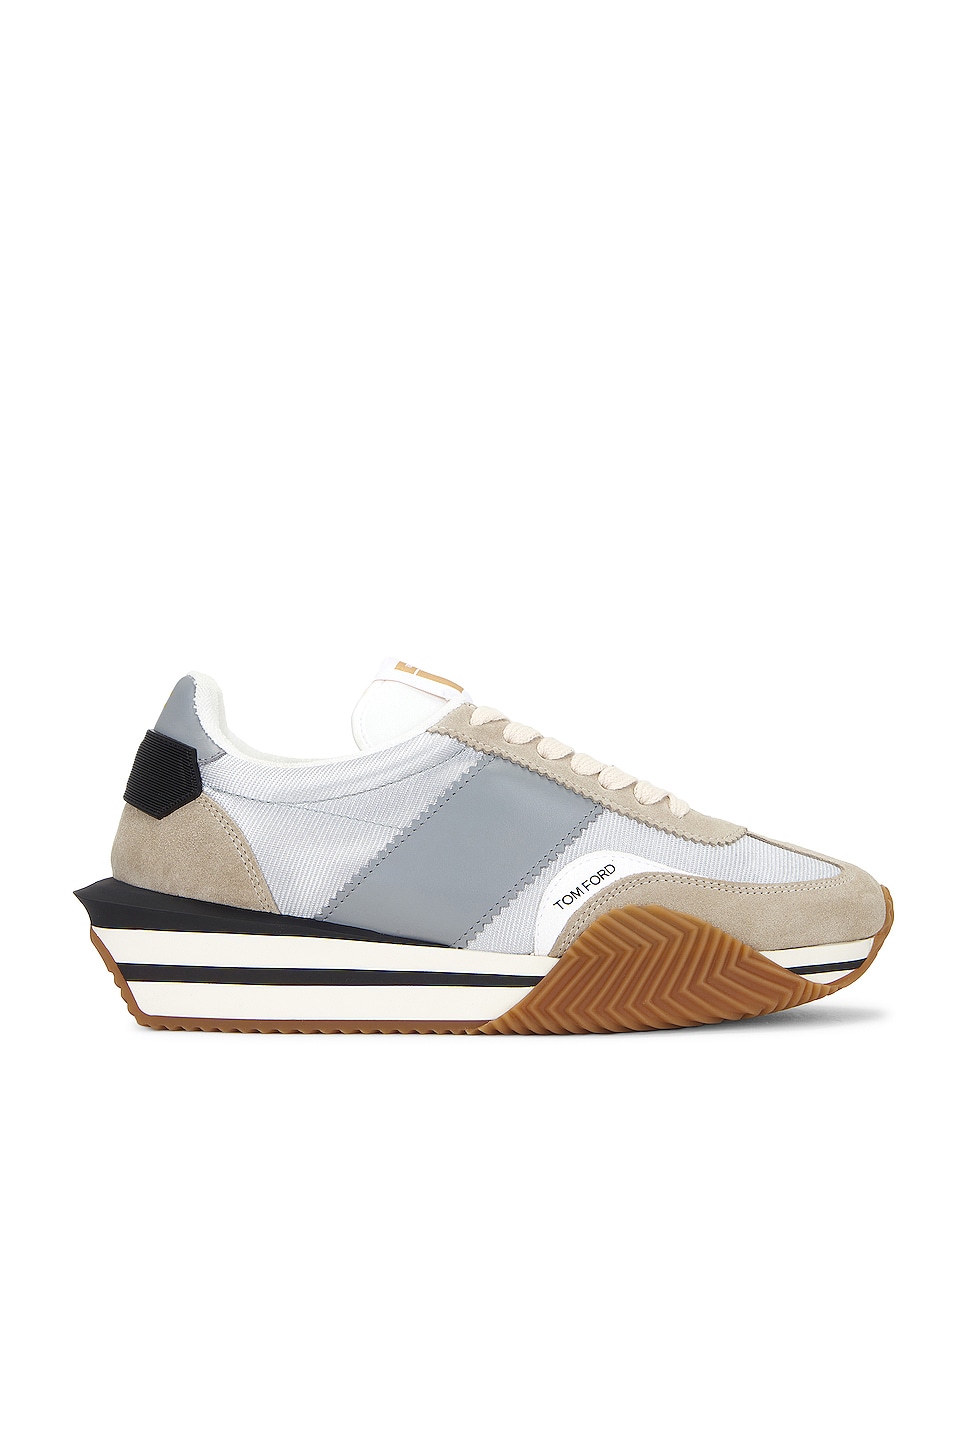 Image 1 of TOM FORD James Sneaker in Silver & Cream